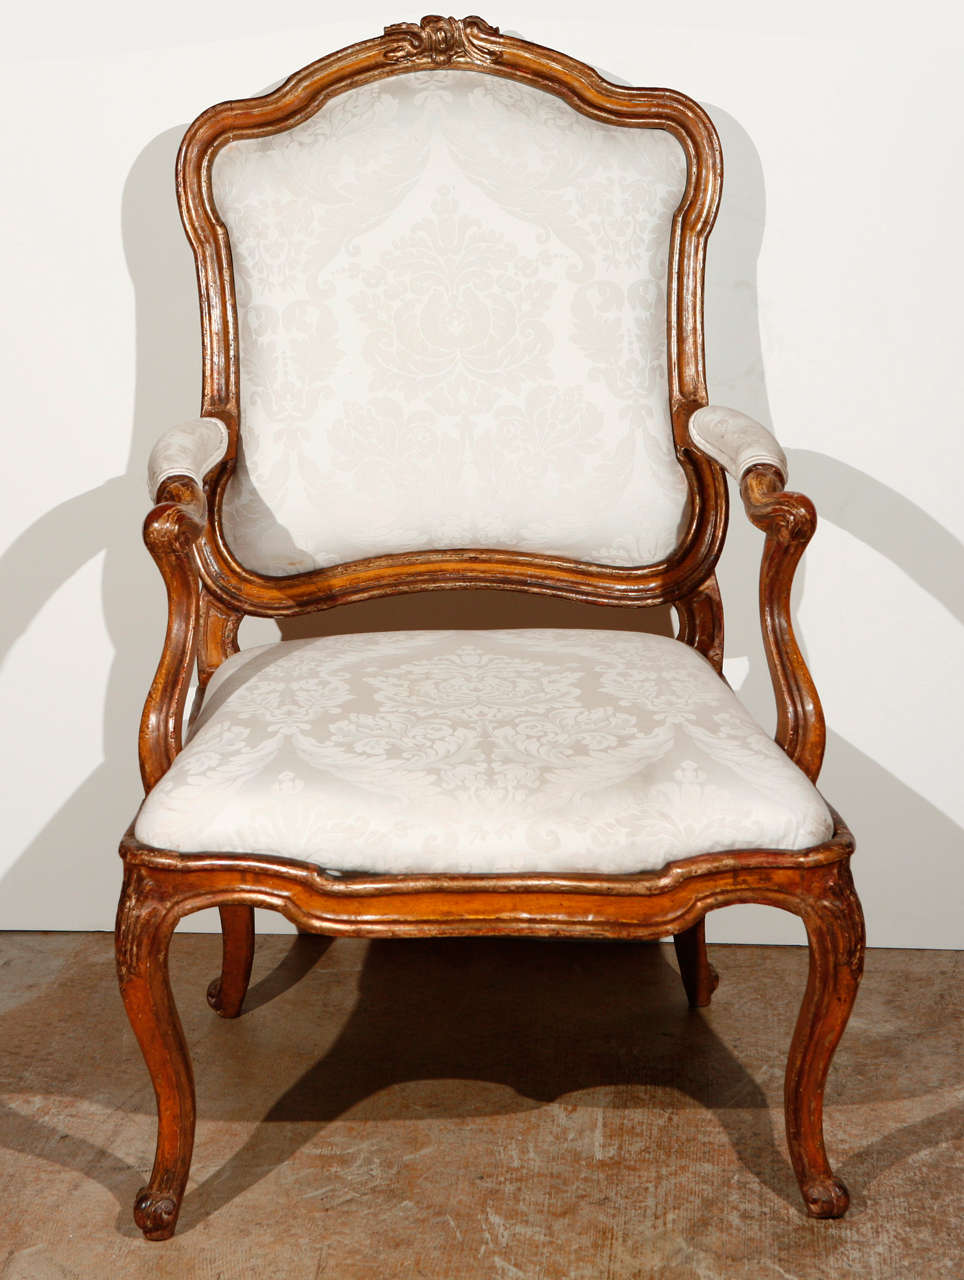 Hand-carved and gilded, Italian, open-arm, Rococo-style armchair with cabriole legs and elegant, serpentine arms. Top rail boasts a foliate relief carving. 